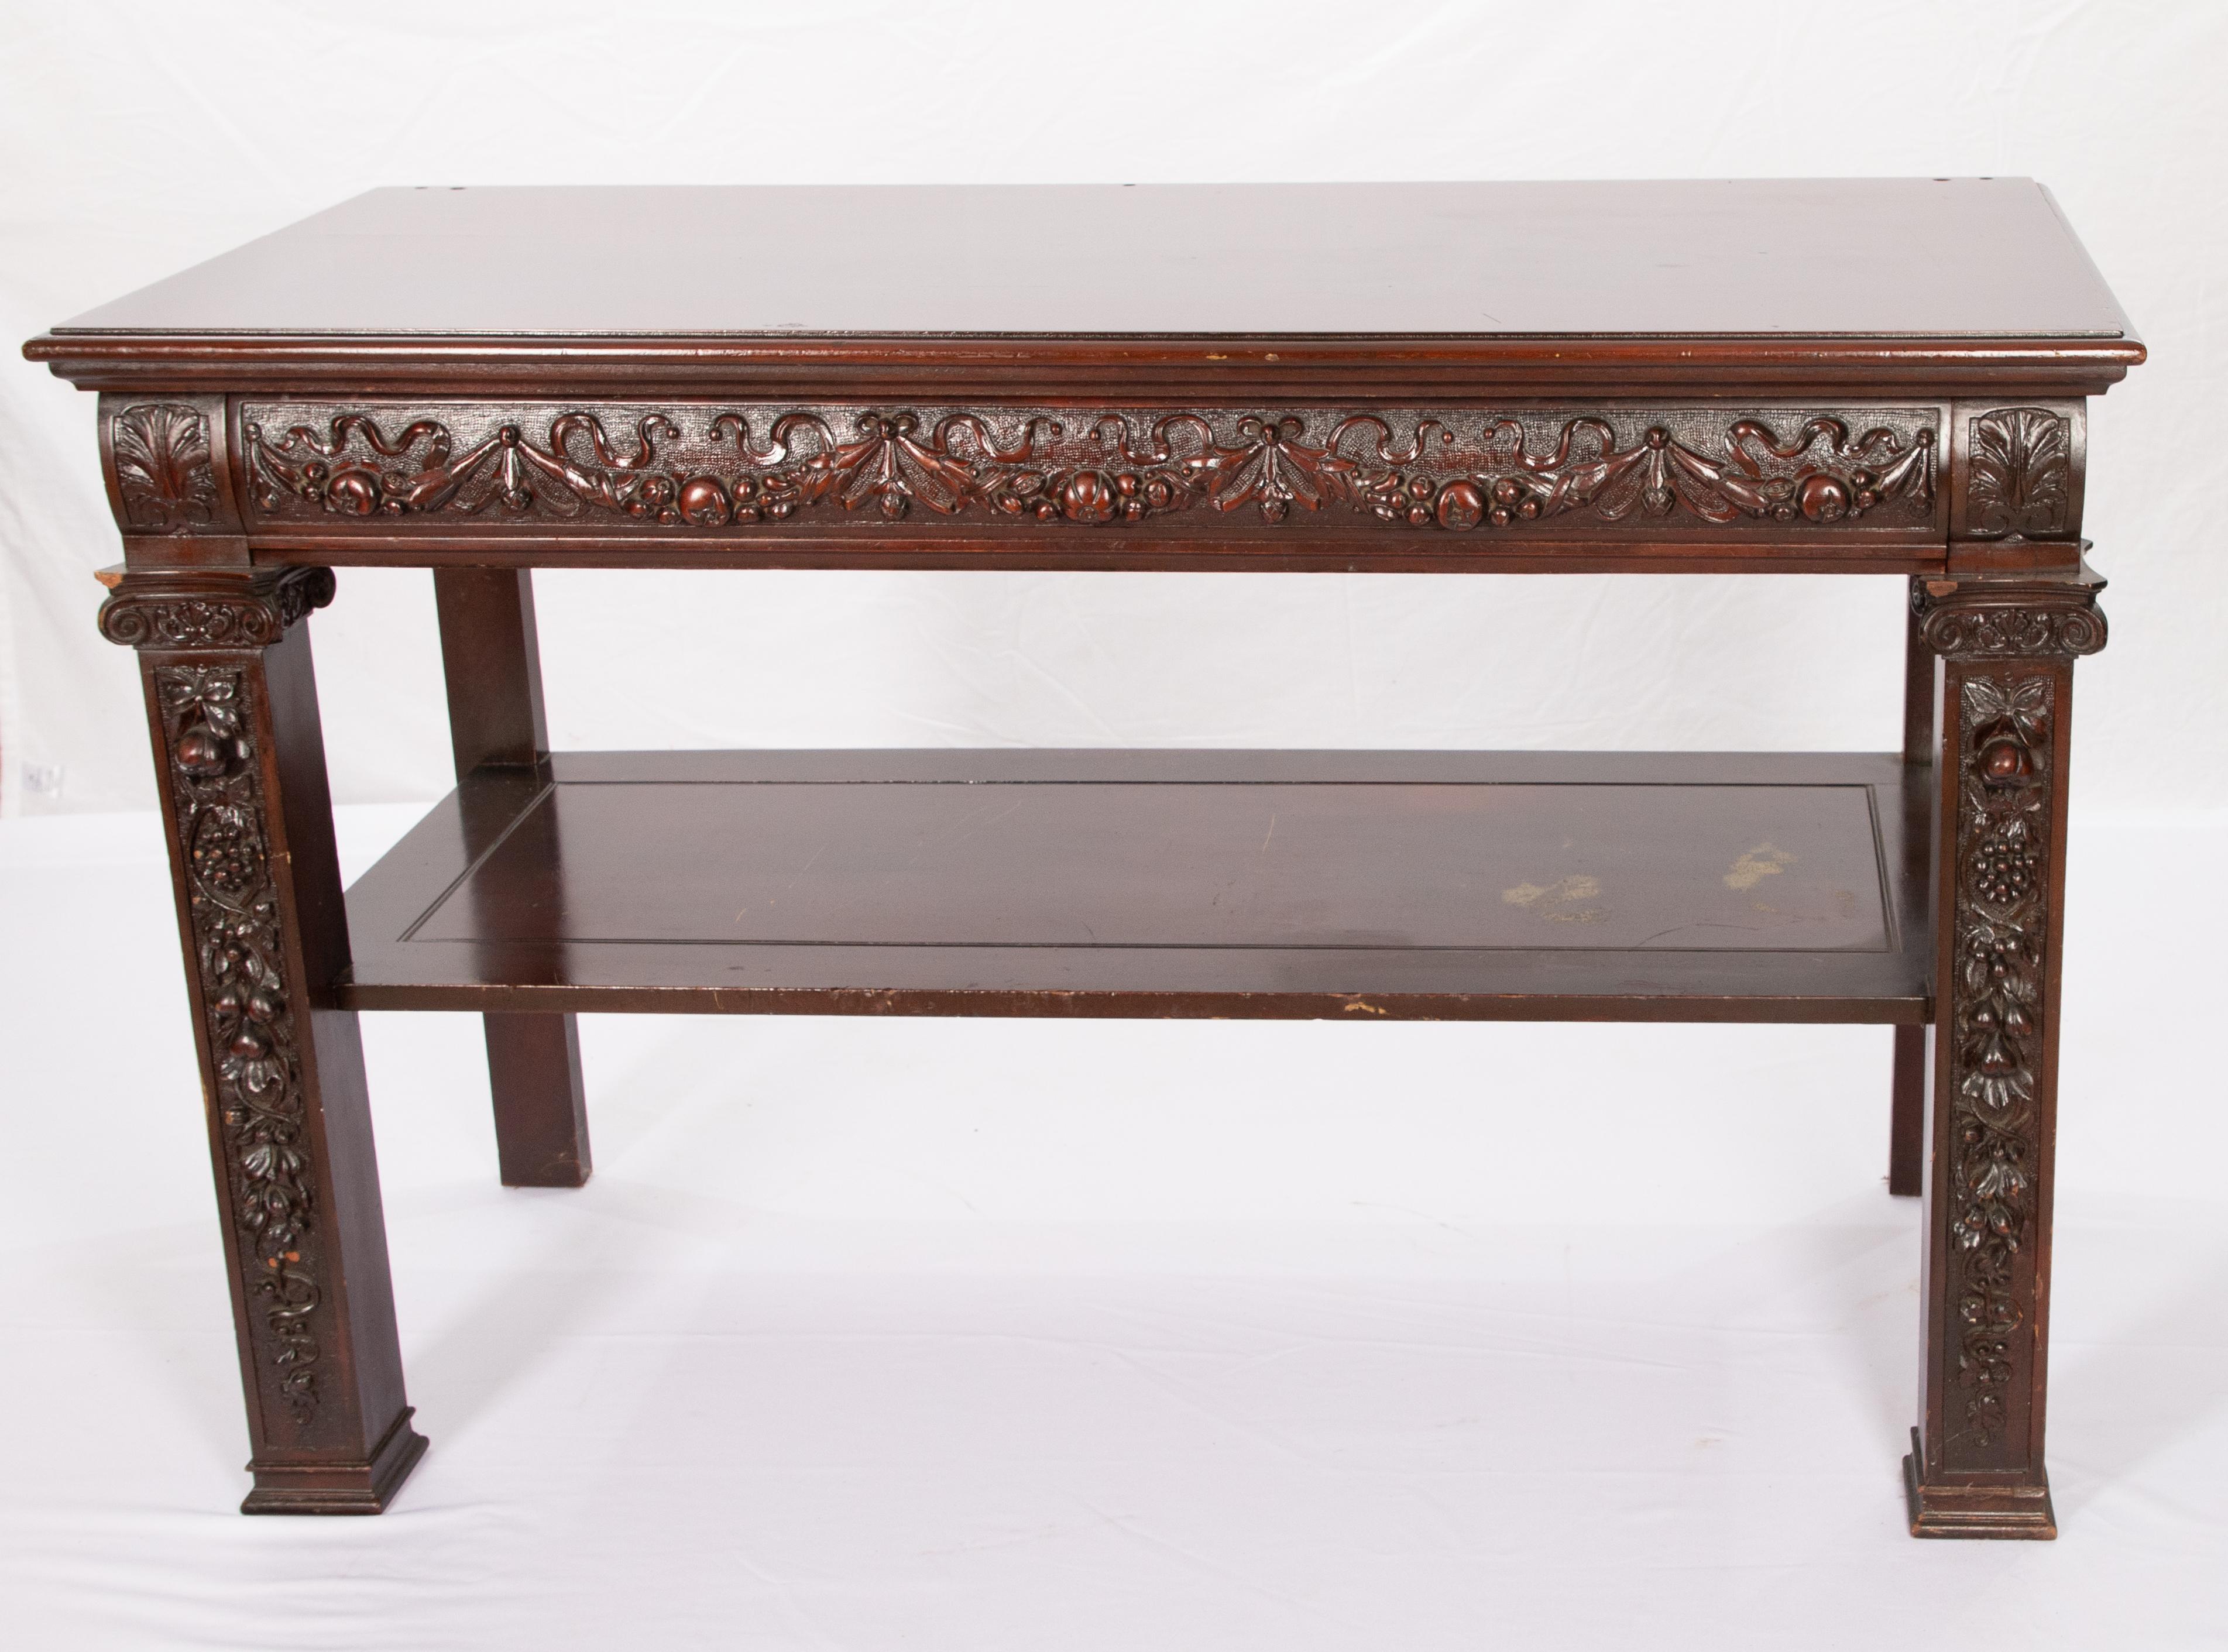 Offering this immaculate AJ Horner side server. Starting one four stately legs that are hand carved with foliate and floral detail. Rising to a center platform and then to the top. The server has the same floral detail around the skirt of the